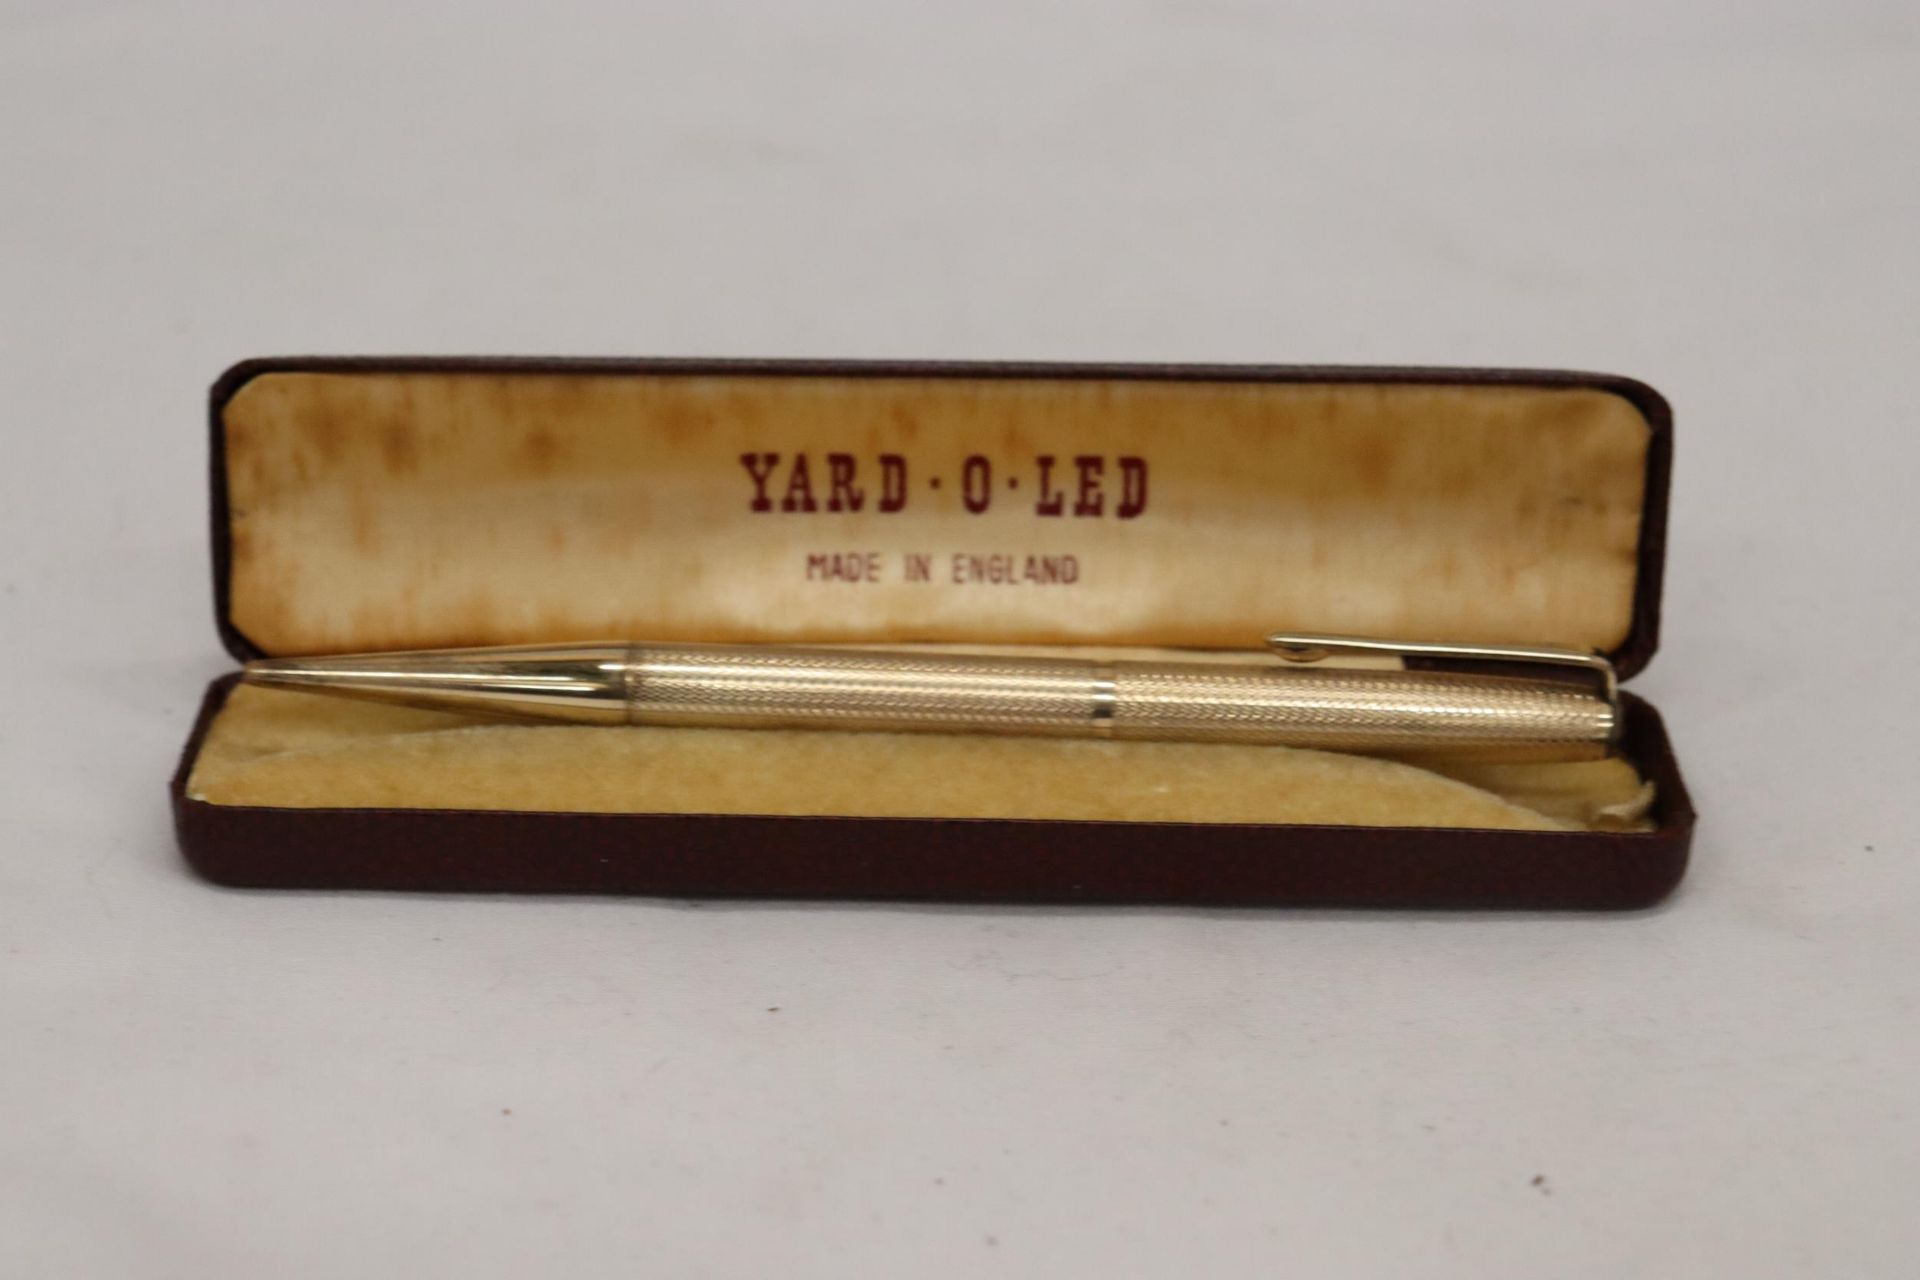 A VINTAGE 'YARD O LED', PROPELLING PENCIL WITH ORIGINAL BOX AND INSTRUCTIONS - Image 2 of 6